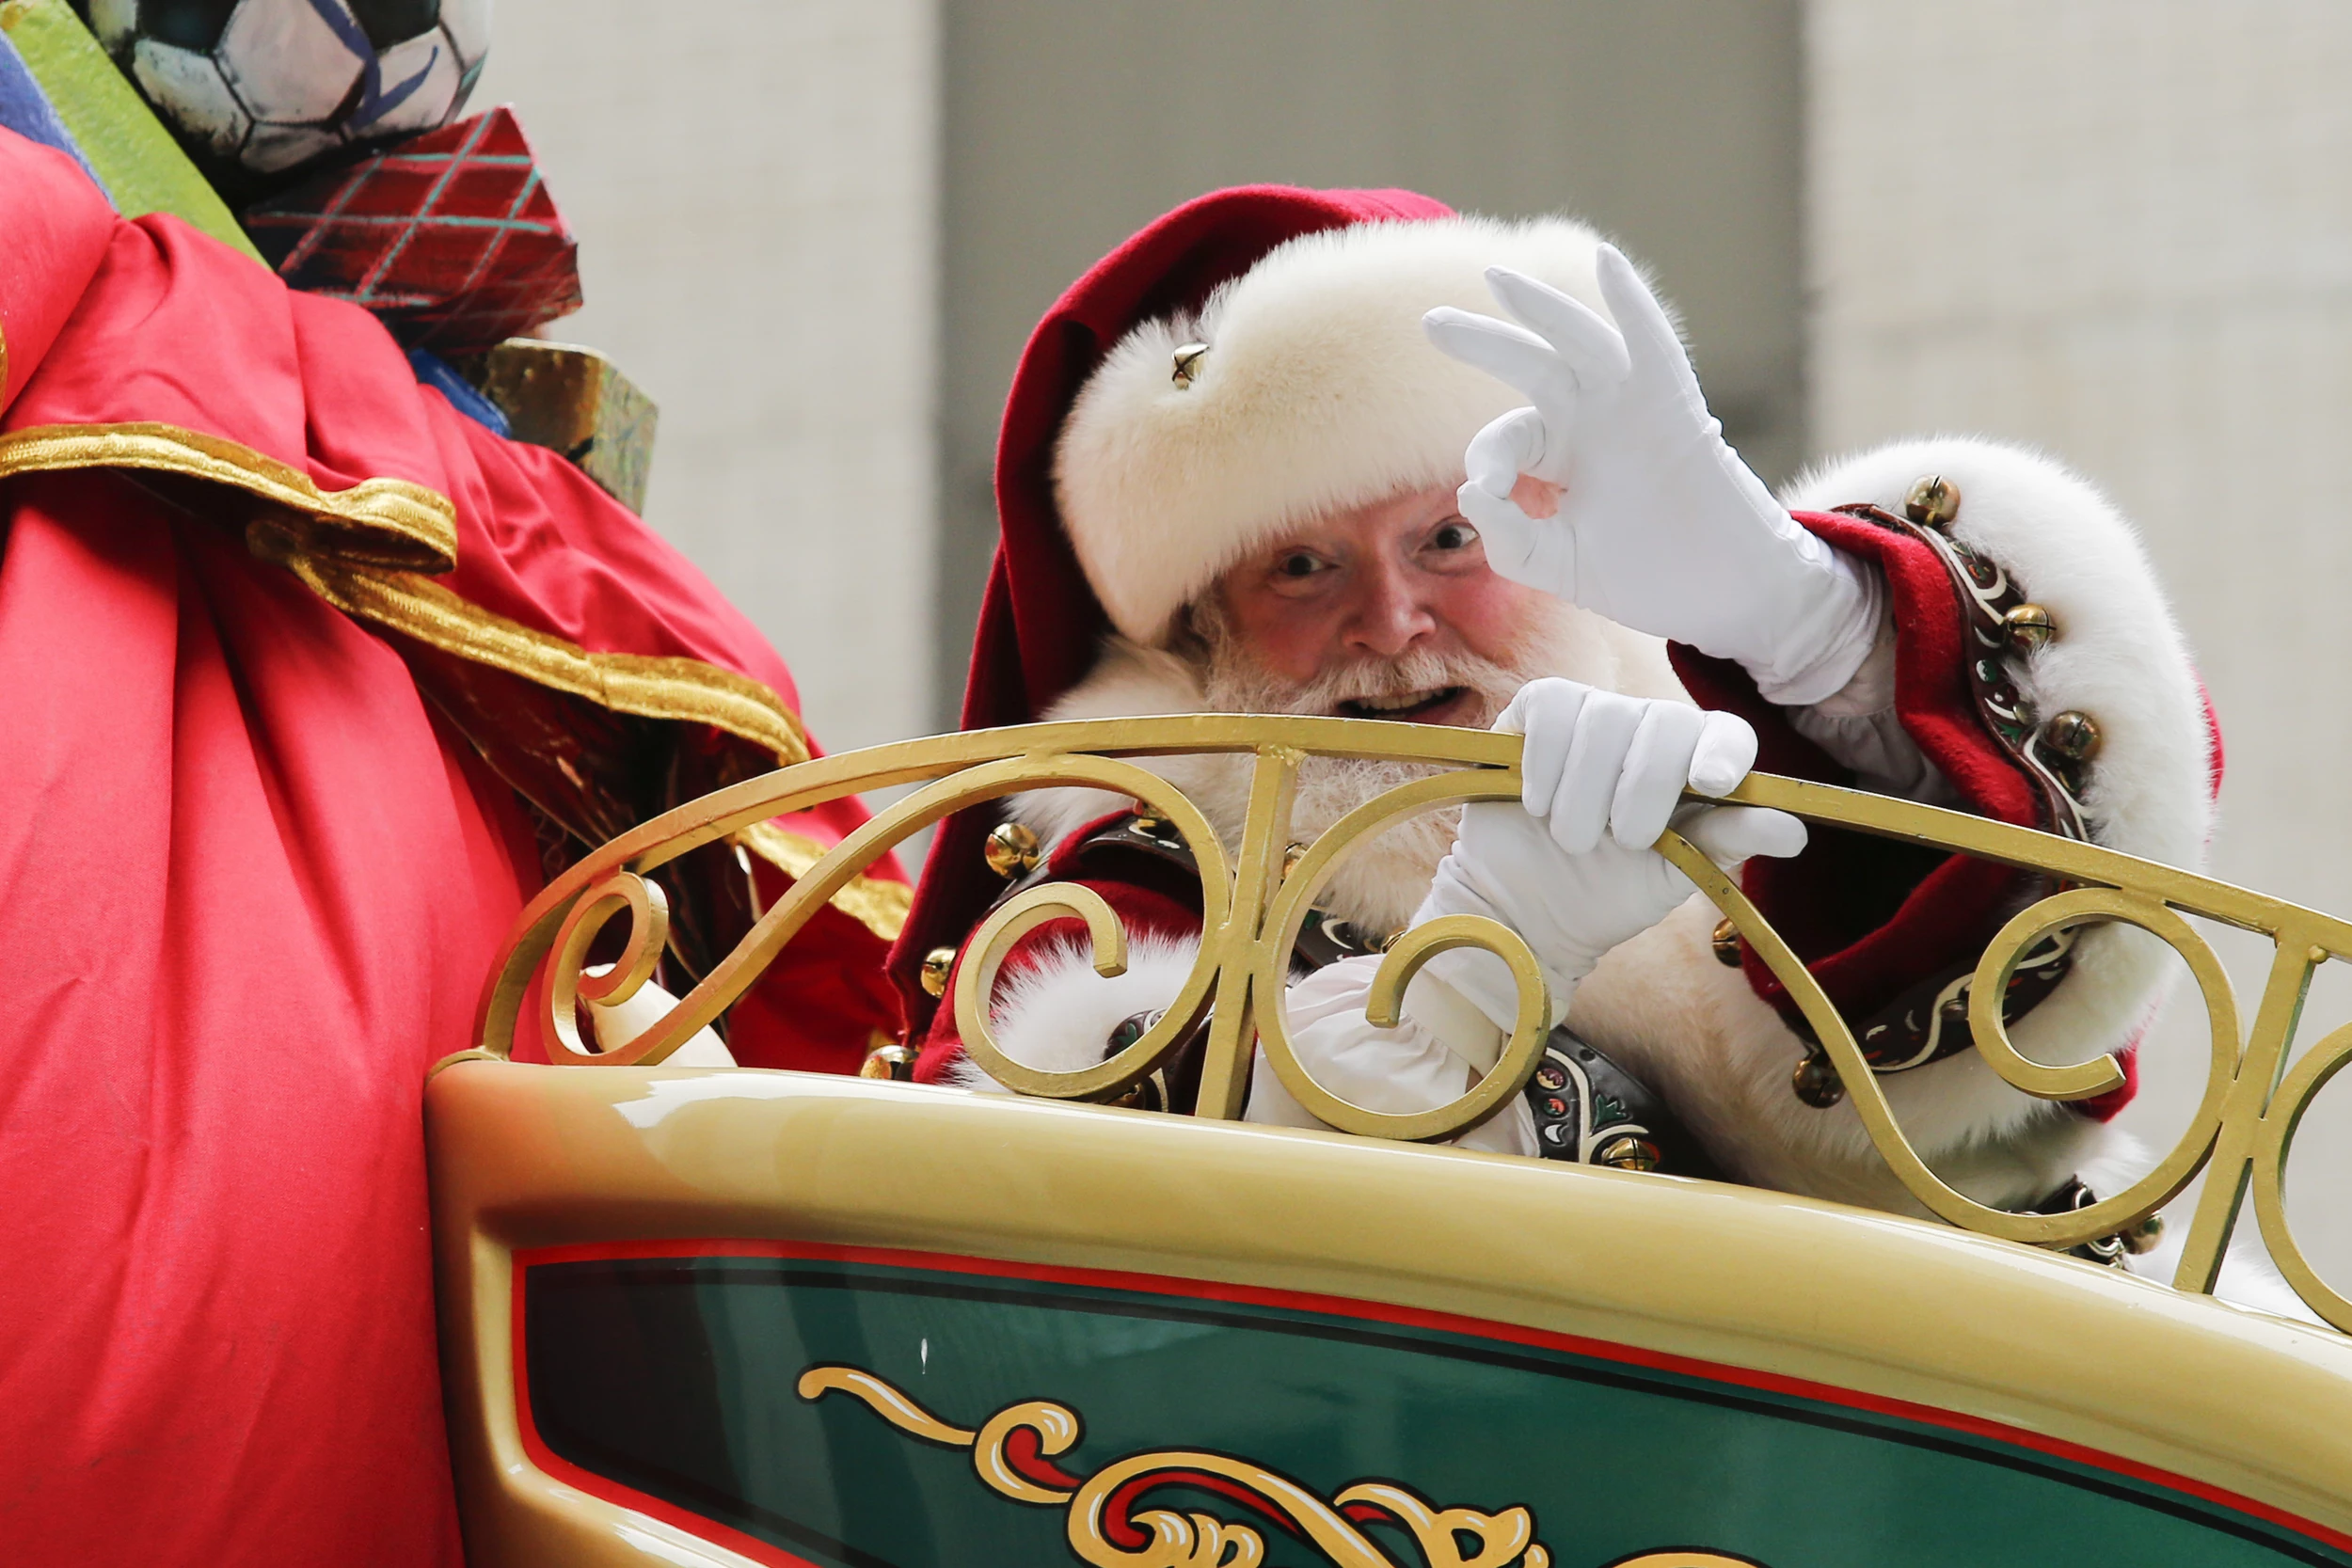 evansville christmas parade 2020 Evansville S Christmas On North Main Parade Canceled For 2020 evansville christmas parade 2020